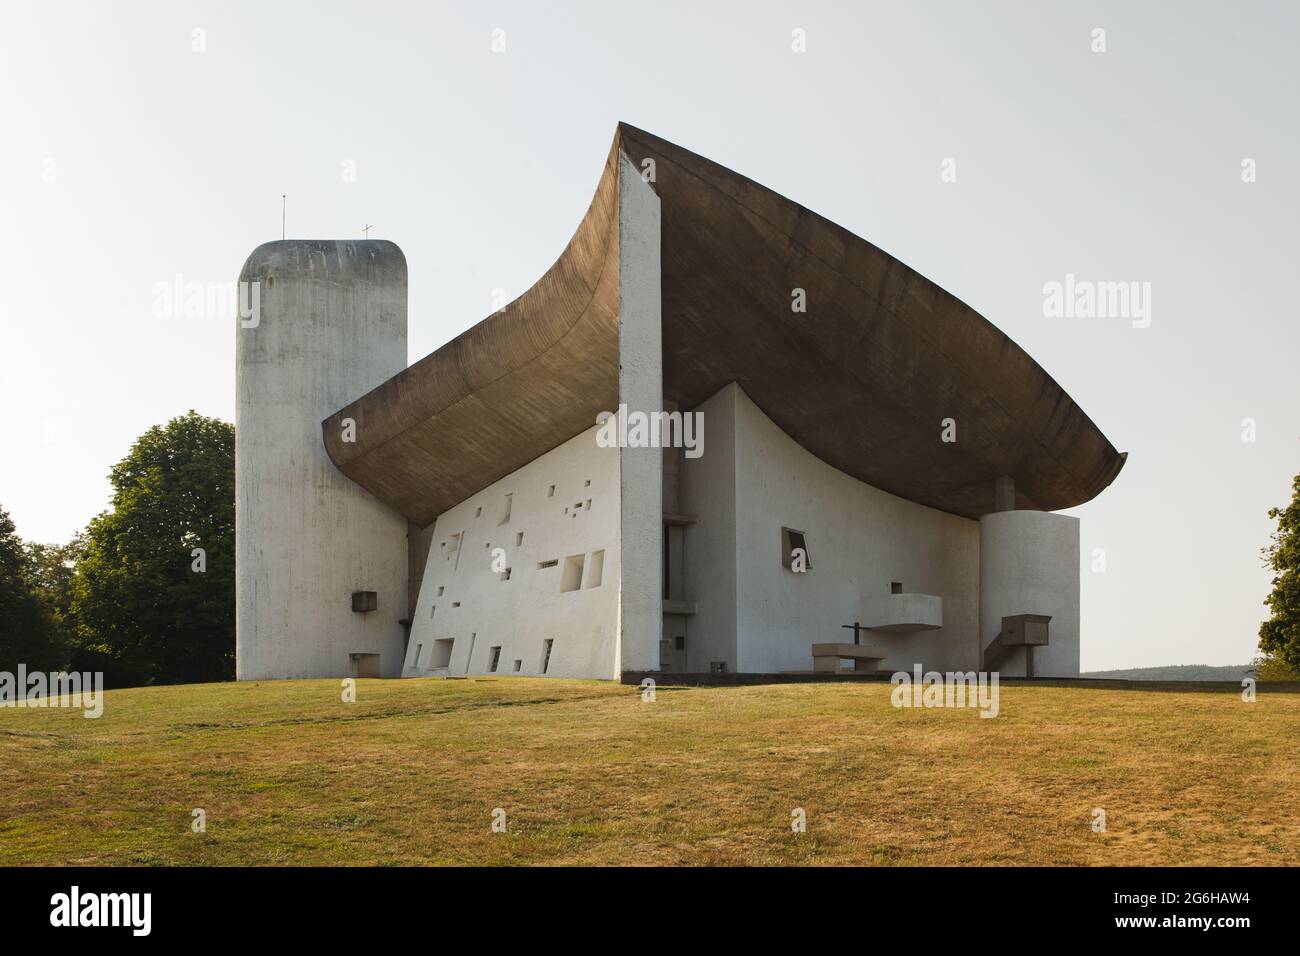 Chapel of Notre Dame du Haut designed by Swiss modernist architect Le Corbusier (1955) in Ronchamp, France. South and east facades of the chapel. Stock Photo